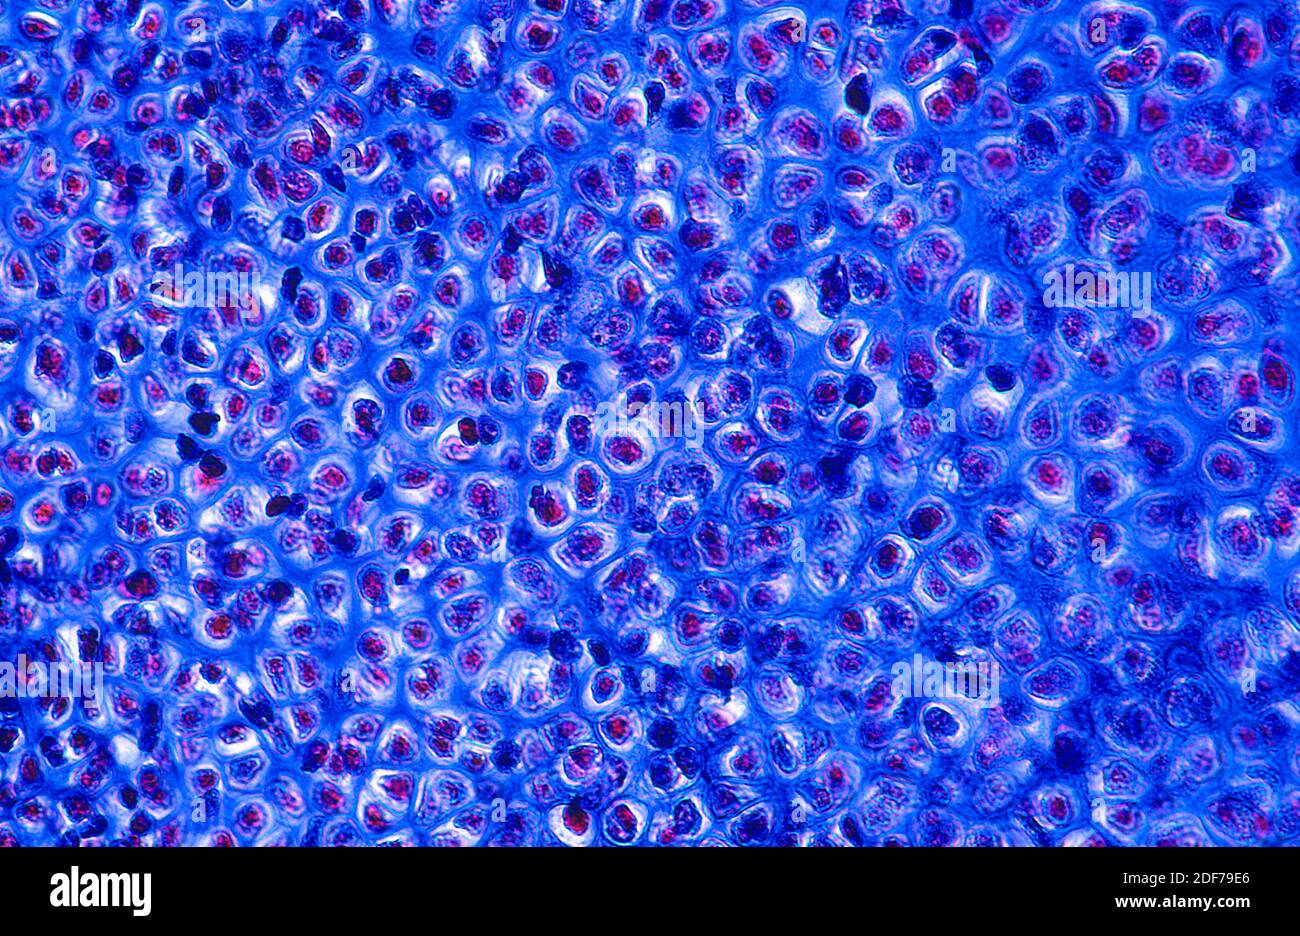 Hyaline cartilage is a kind of cartilage tissue. Photomicrograph. Stock Photo